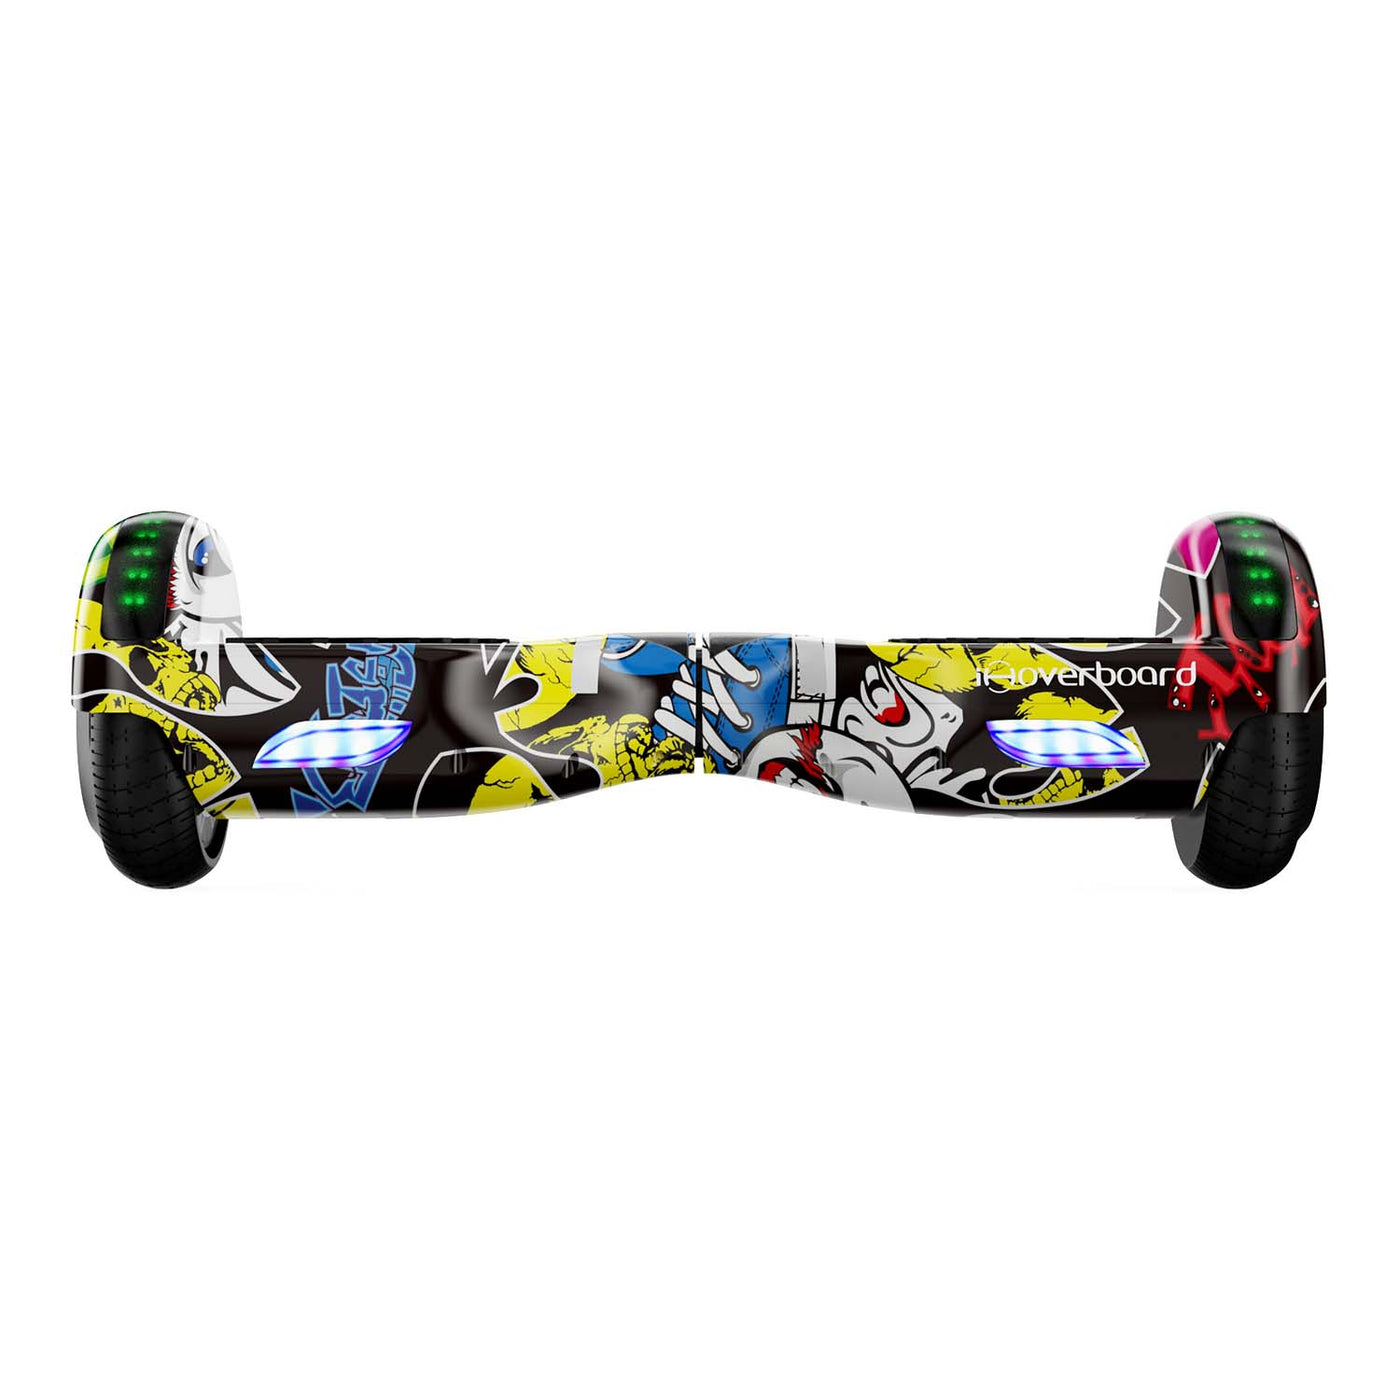 iHoverboard H4 Yellow Bluetooth Hoverboard 6.5"